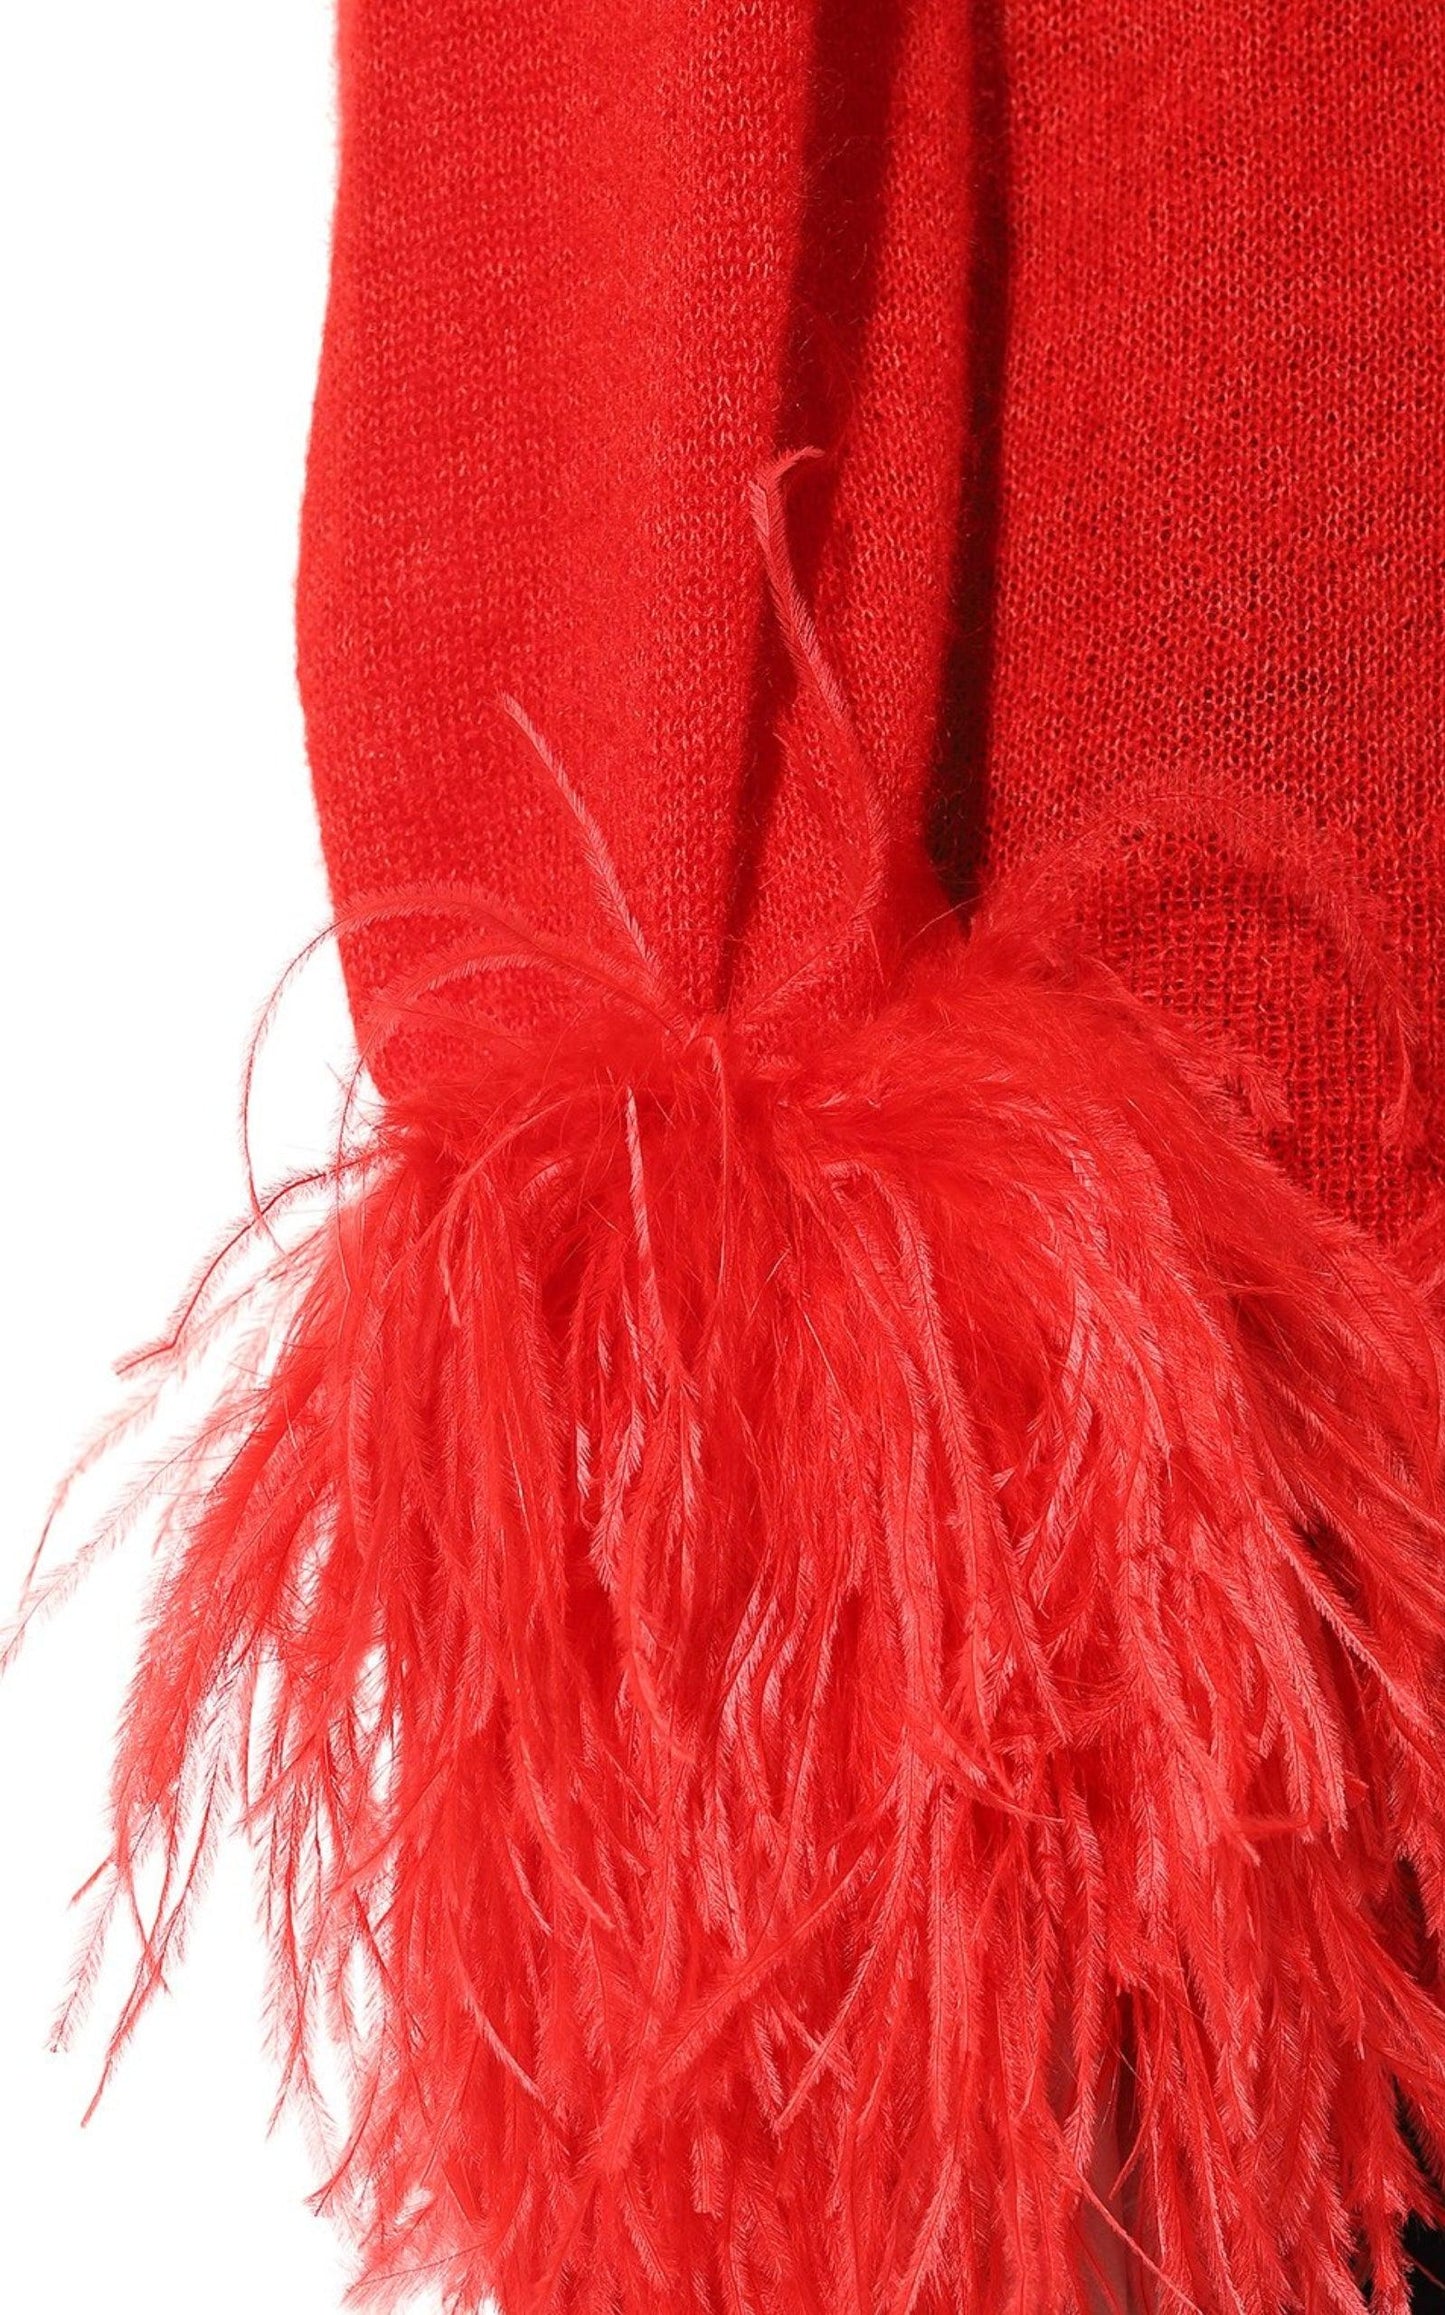 Red Feather Cuff Mohair Sweater-Sweaters & Sweatshirts-Gucci-S-Red-Mohair-Runway Catalog